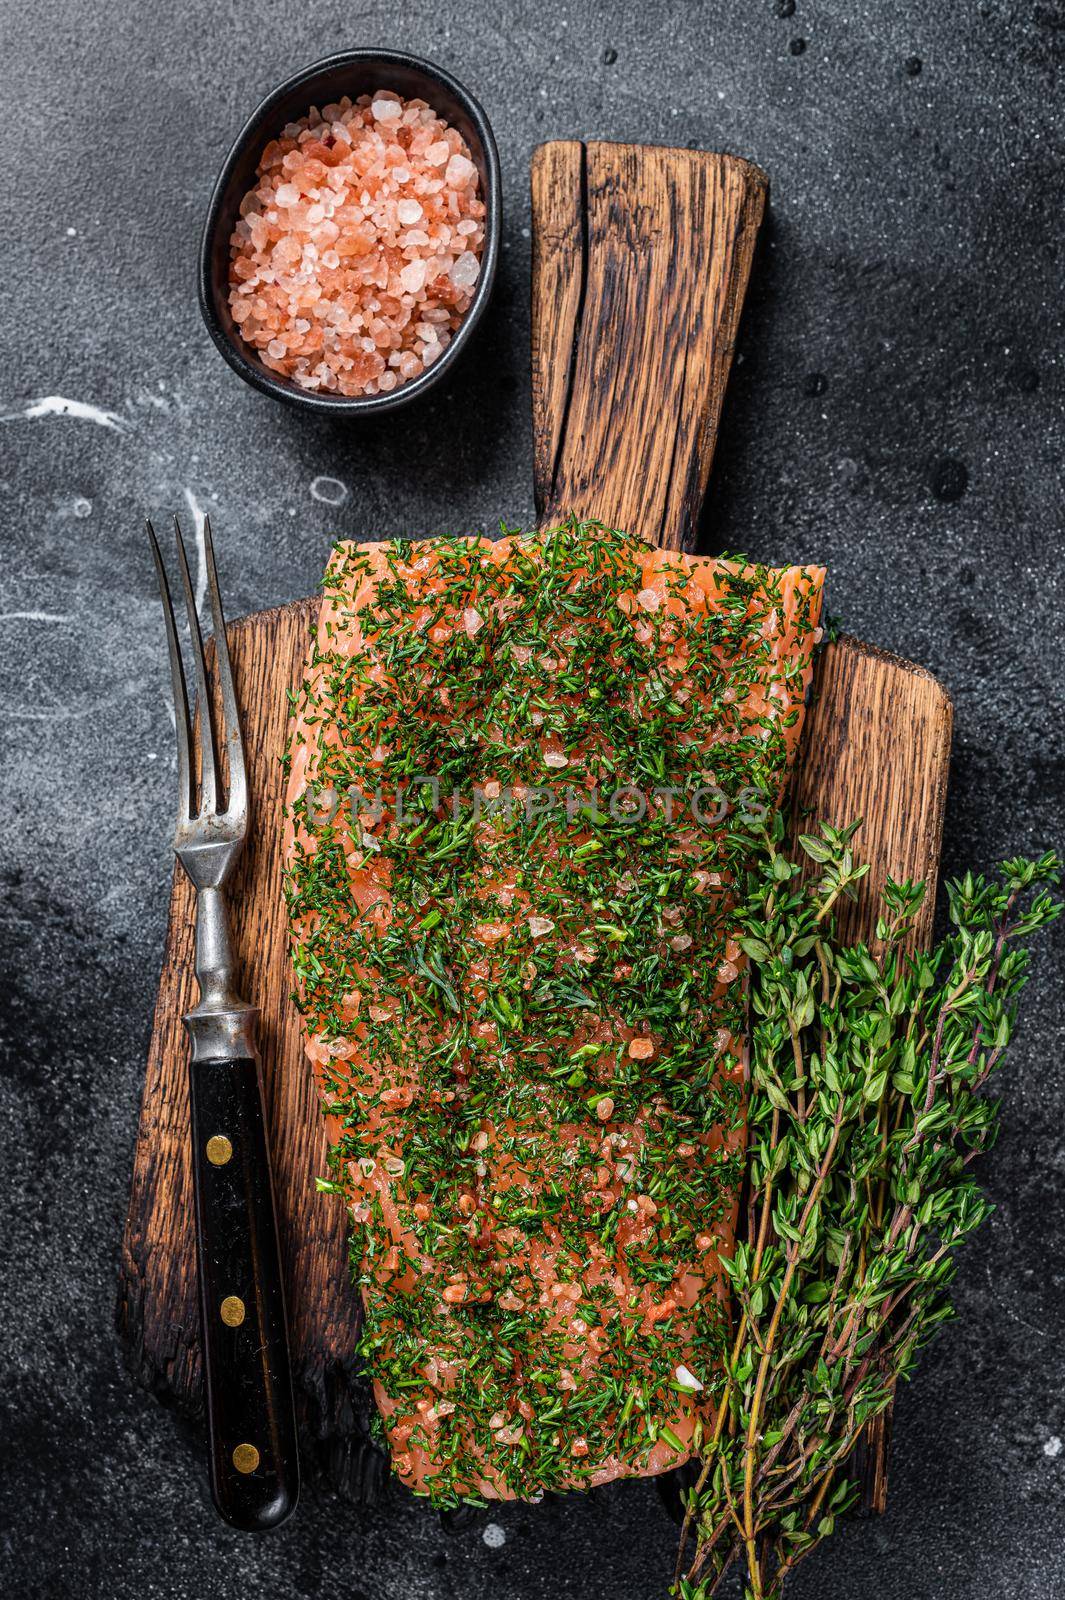 Gravlax cured salmon with dill and salt on wooden board. Black background. Top view by Composter